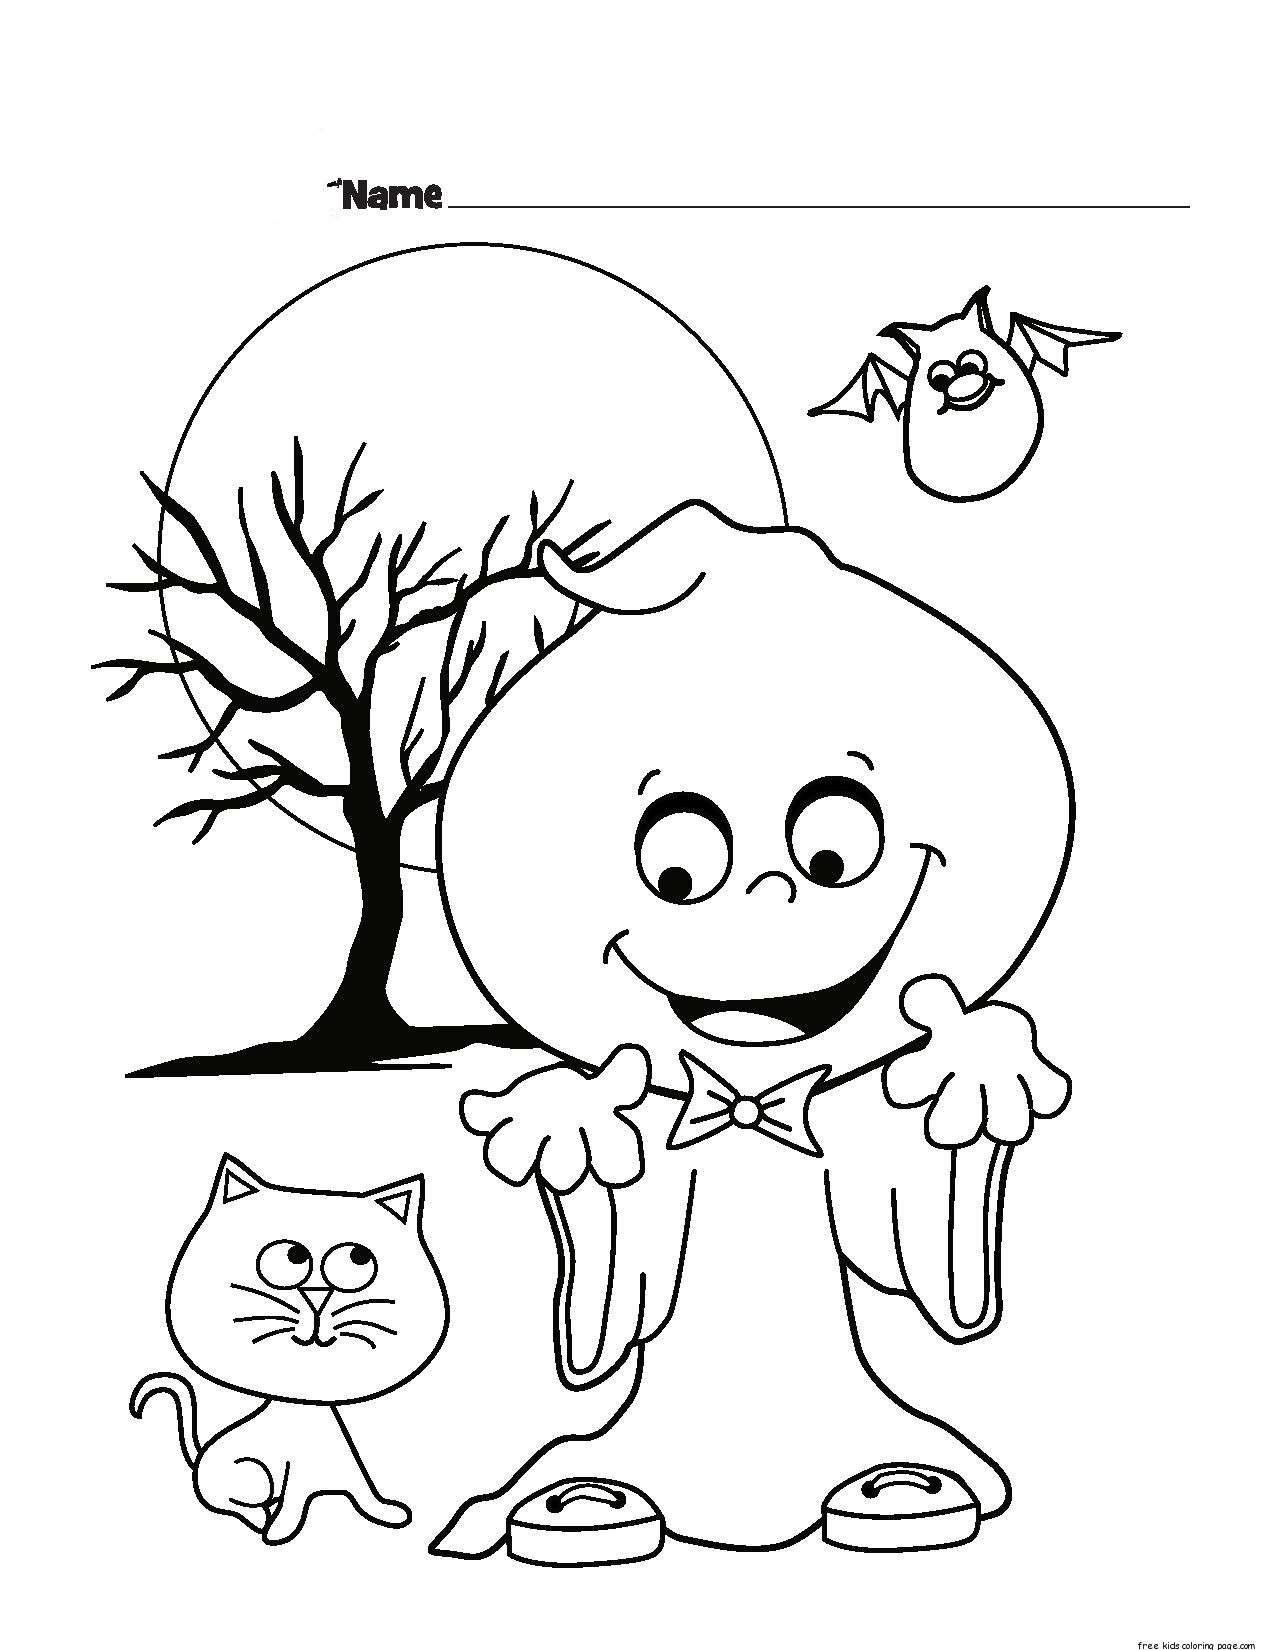 Printable Coloring Pages For Toddlers Free
 halloween ghost printable coloring pages for kidsFree